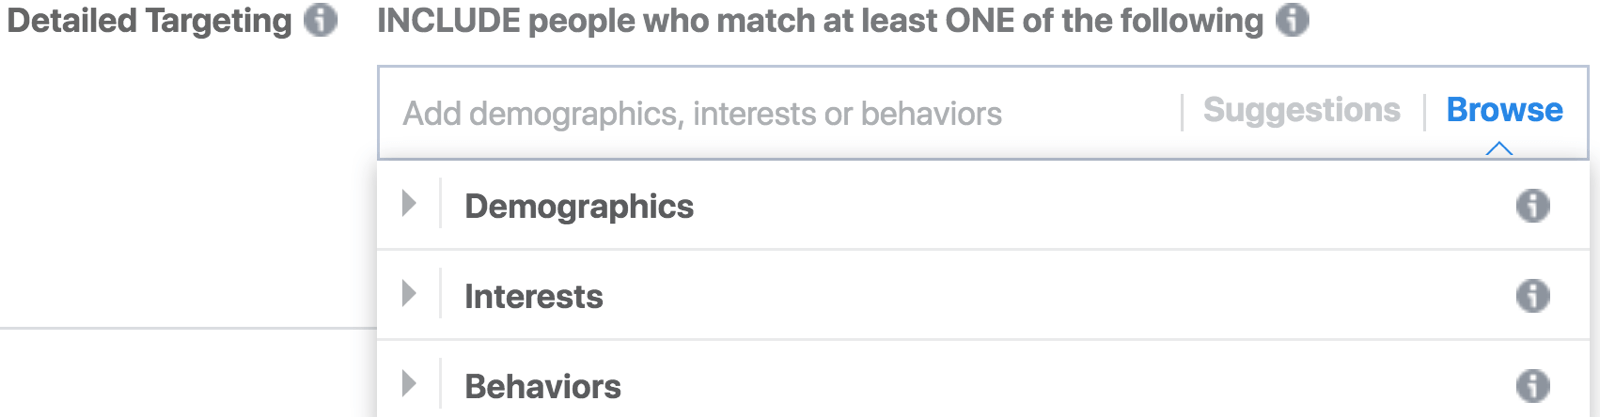 Detailed targeting based on demographics, interests and beheviors.